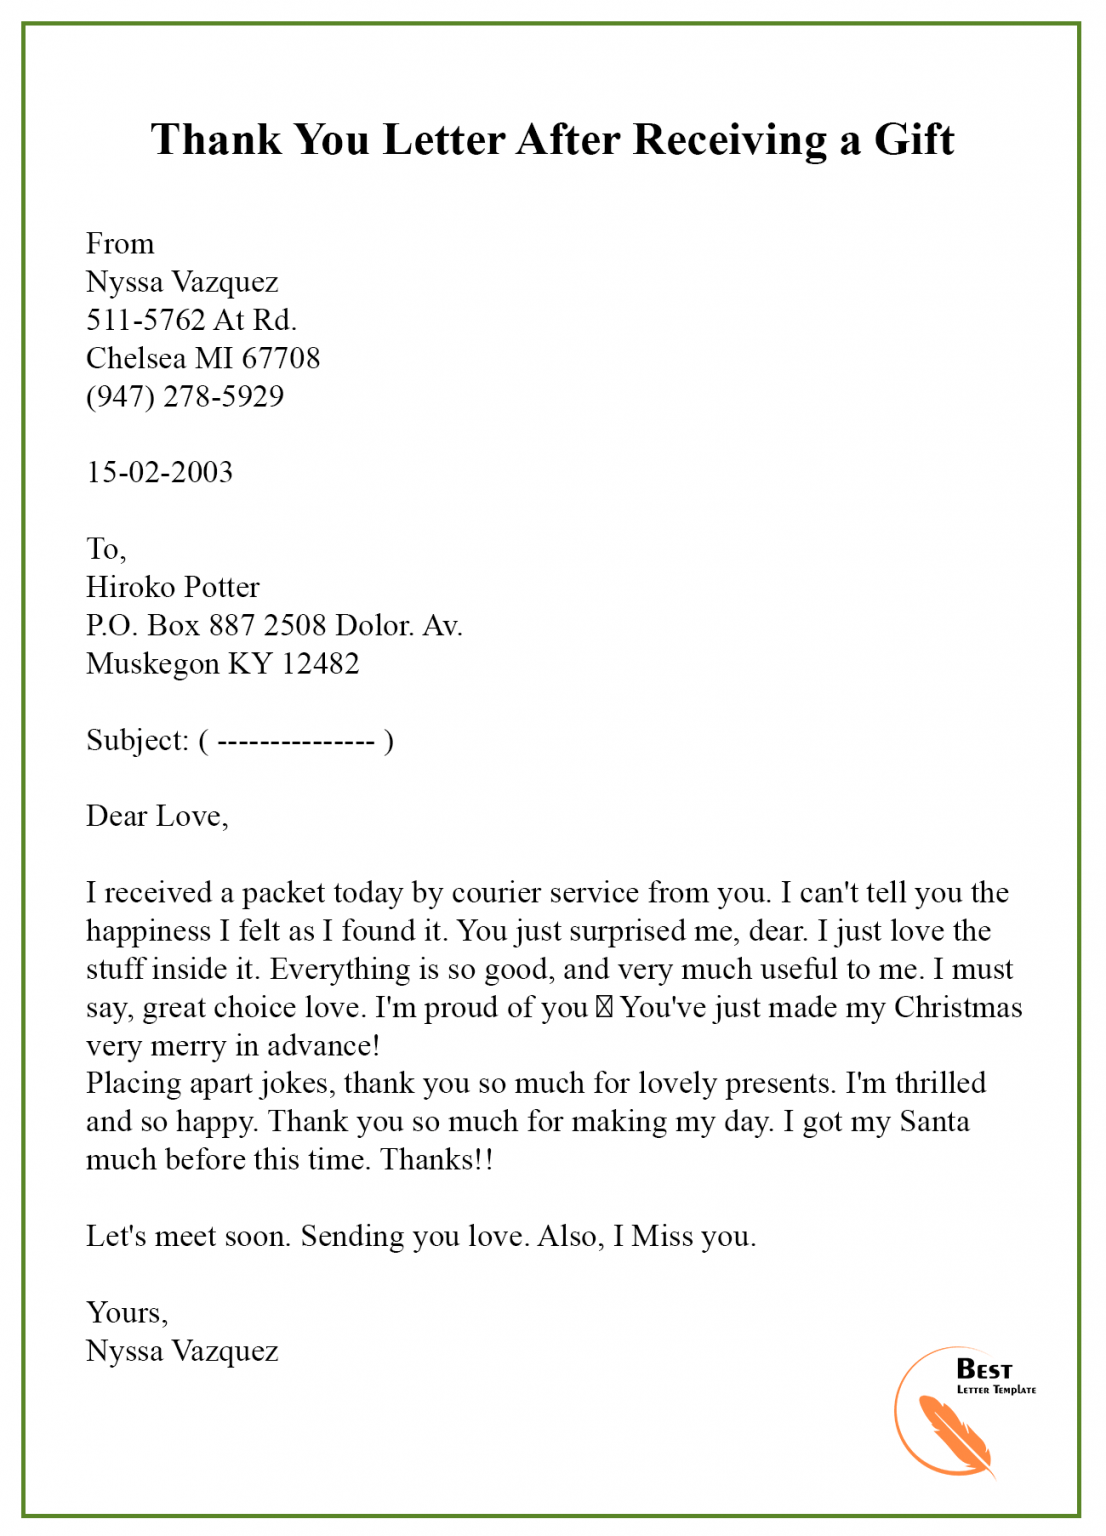 Thank You Letter Template For Gift - Sample & Examples